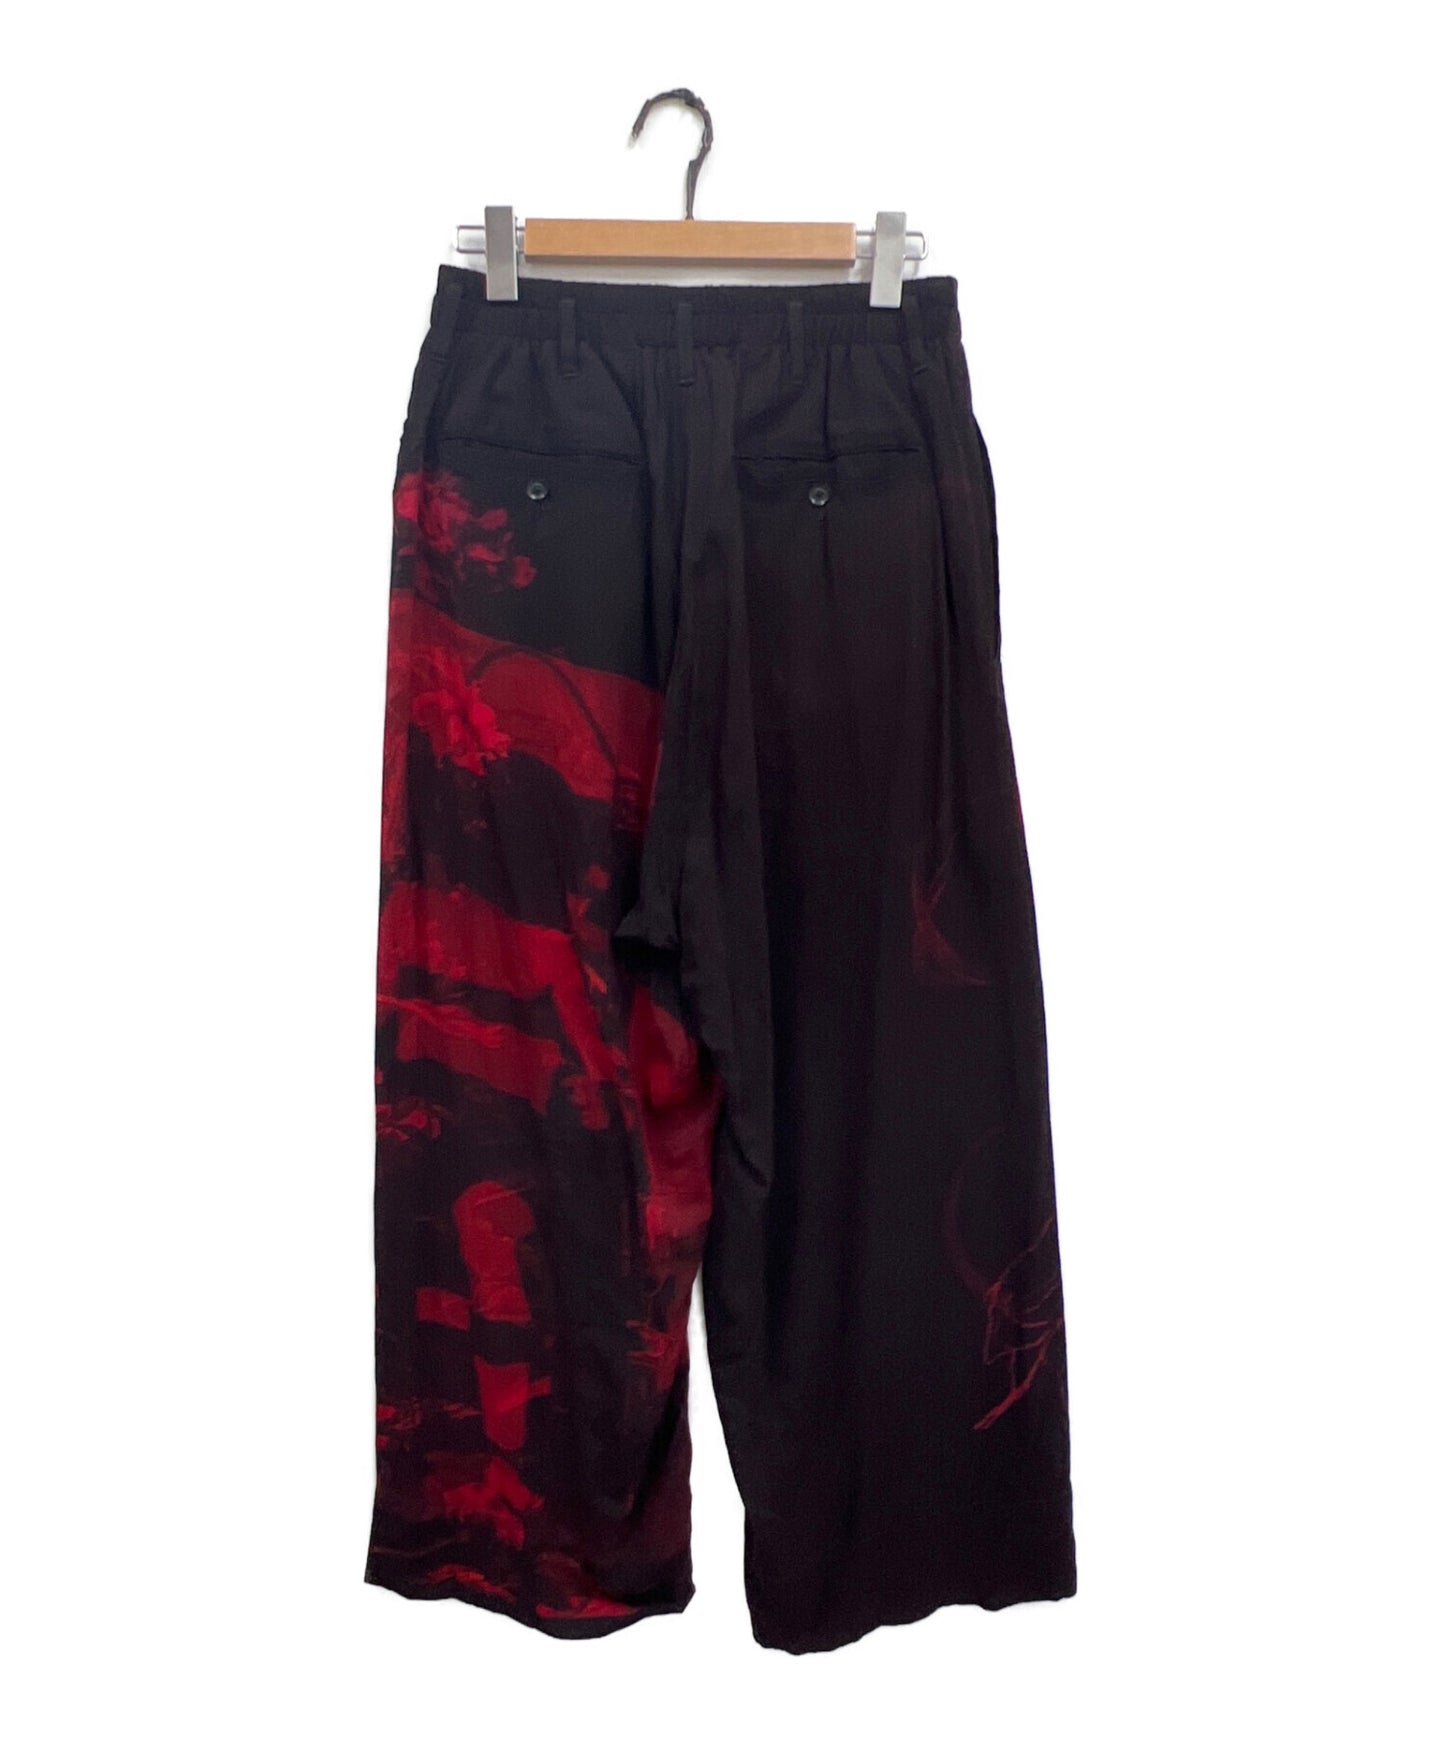 Yohji Yamamoto pour homme Red print P with separate pattern on left and right HH-P81-811